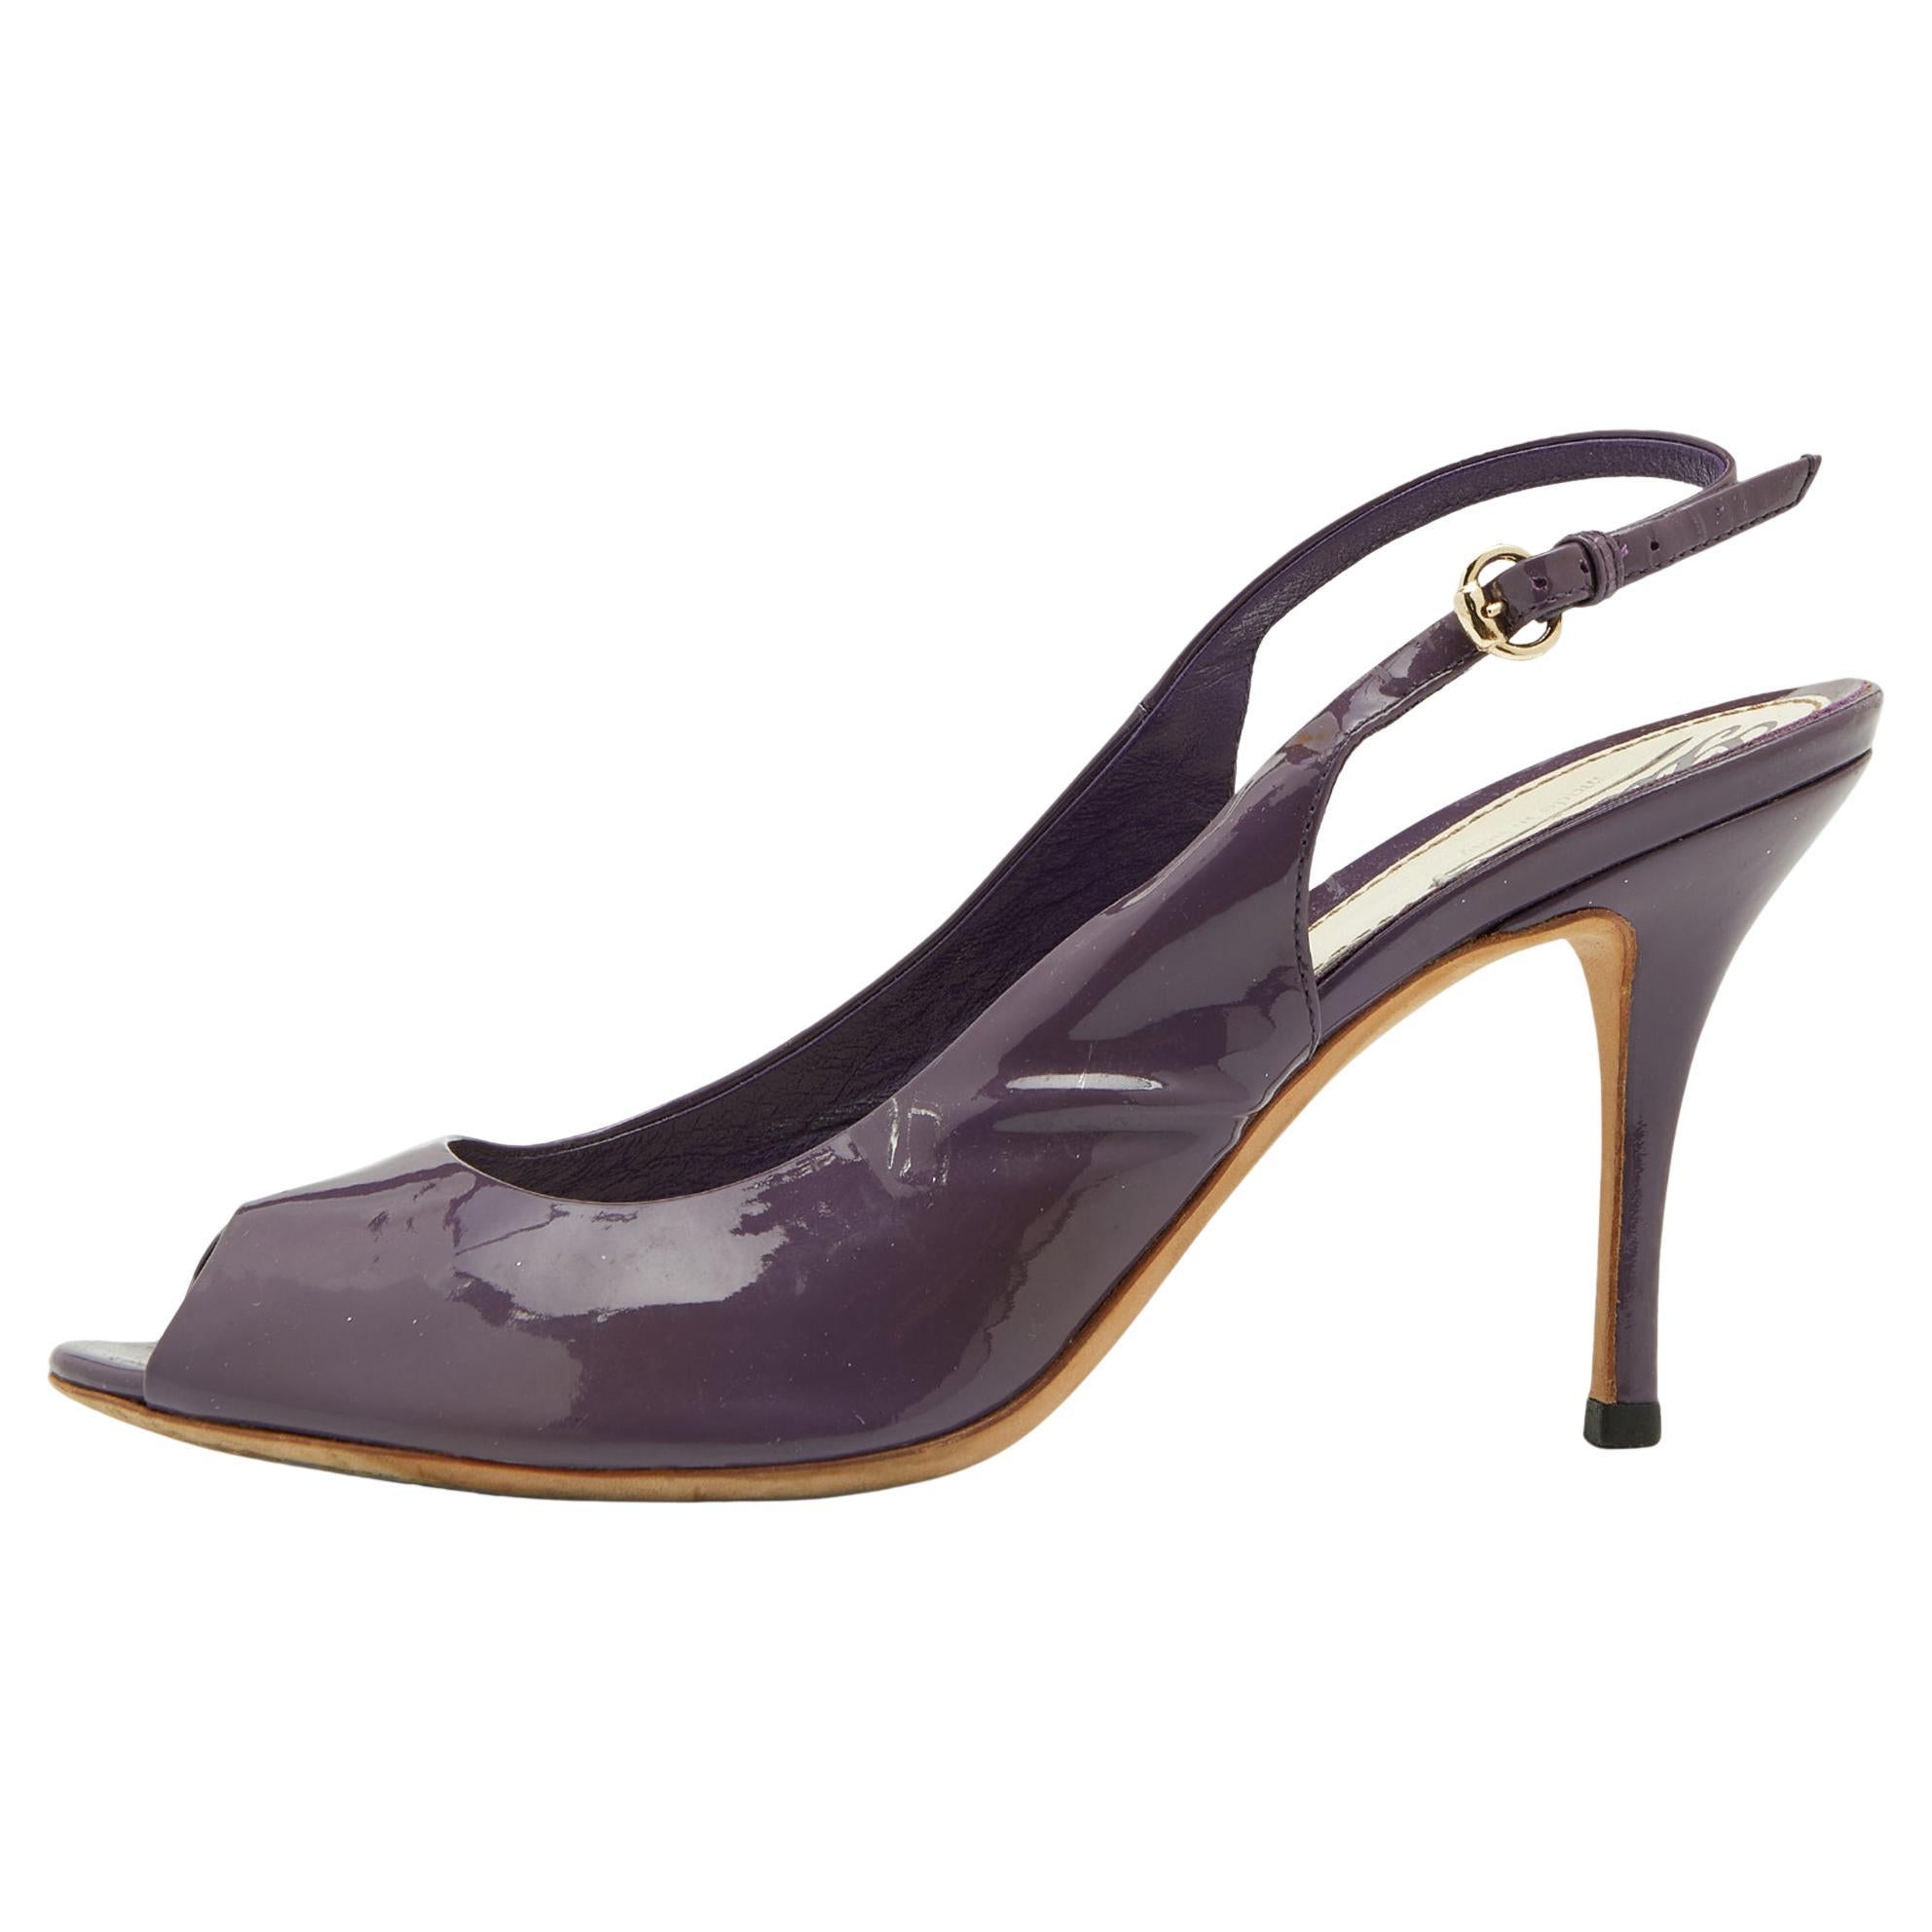 Gucci Purple Patent Leather Peep-Toe Slingback Sandals Size 38.5 For Sale